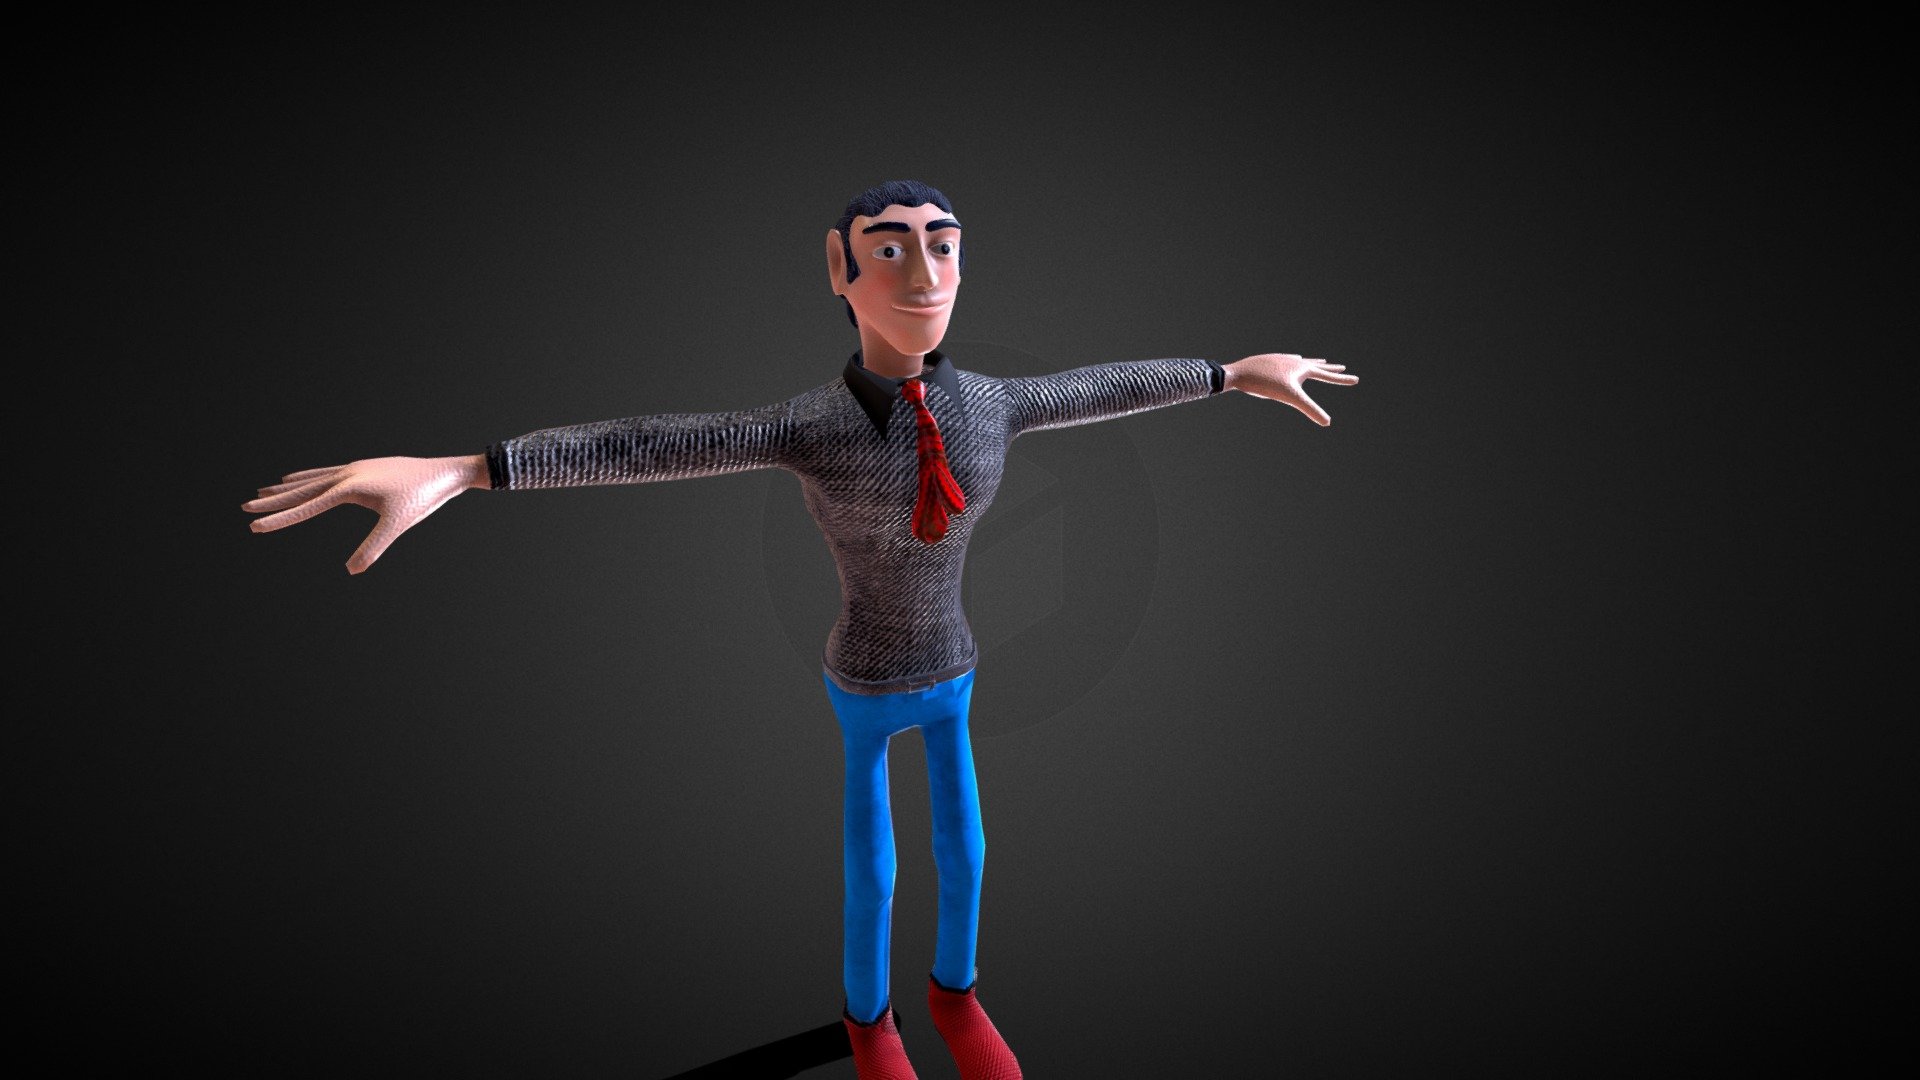 this is my first cartoon creat in zbrush substain painter and Maya rigg with advanced skeleton
model texture design for redshift
link https://www.artstation.com/artwork/DAVqL9
if have question let me know - Cartoon - Download Free 3D model by ab.khalil.salik (@abkhalilsalik) 3d model